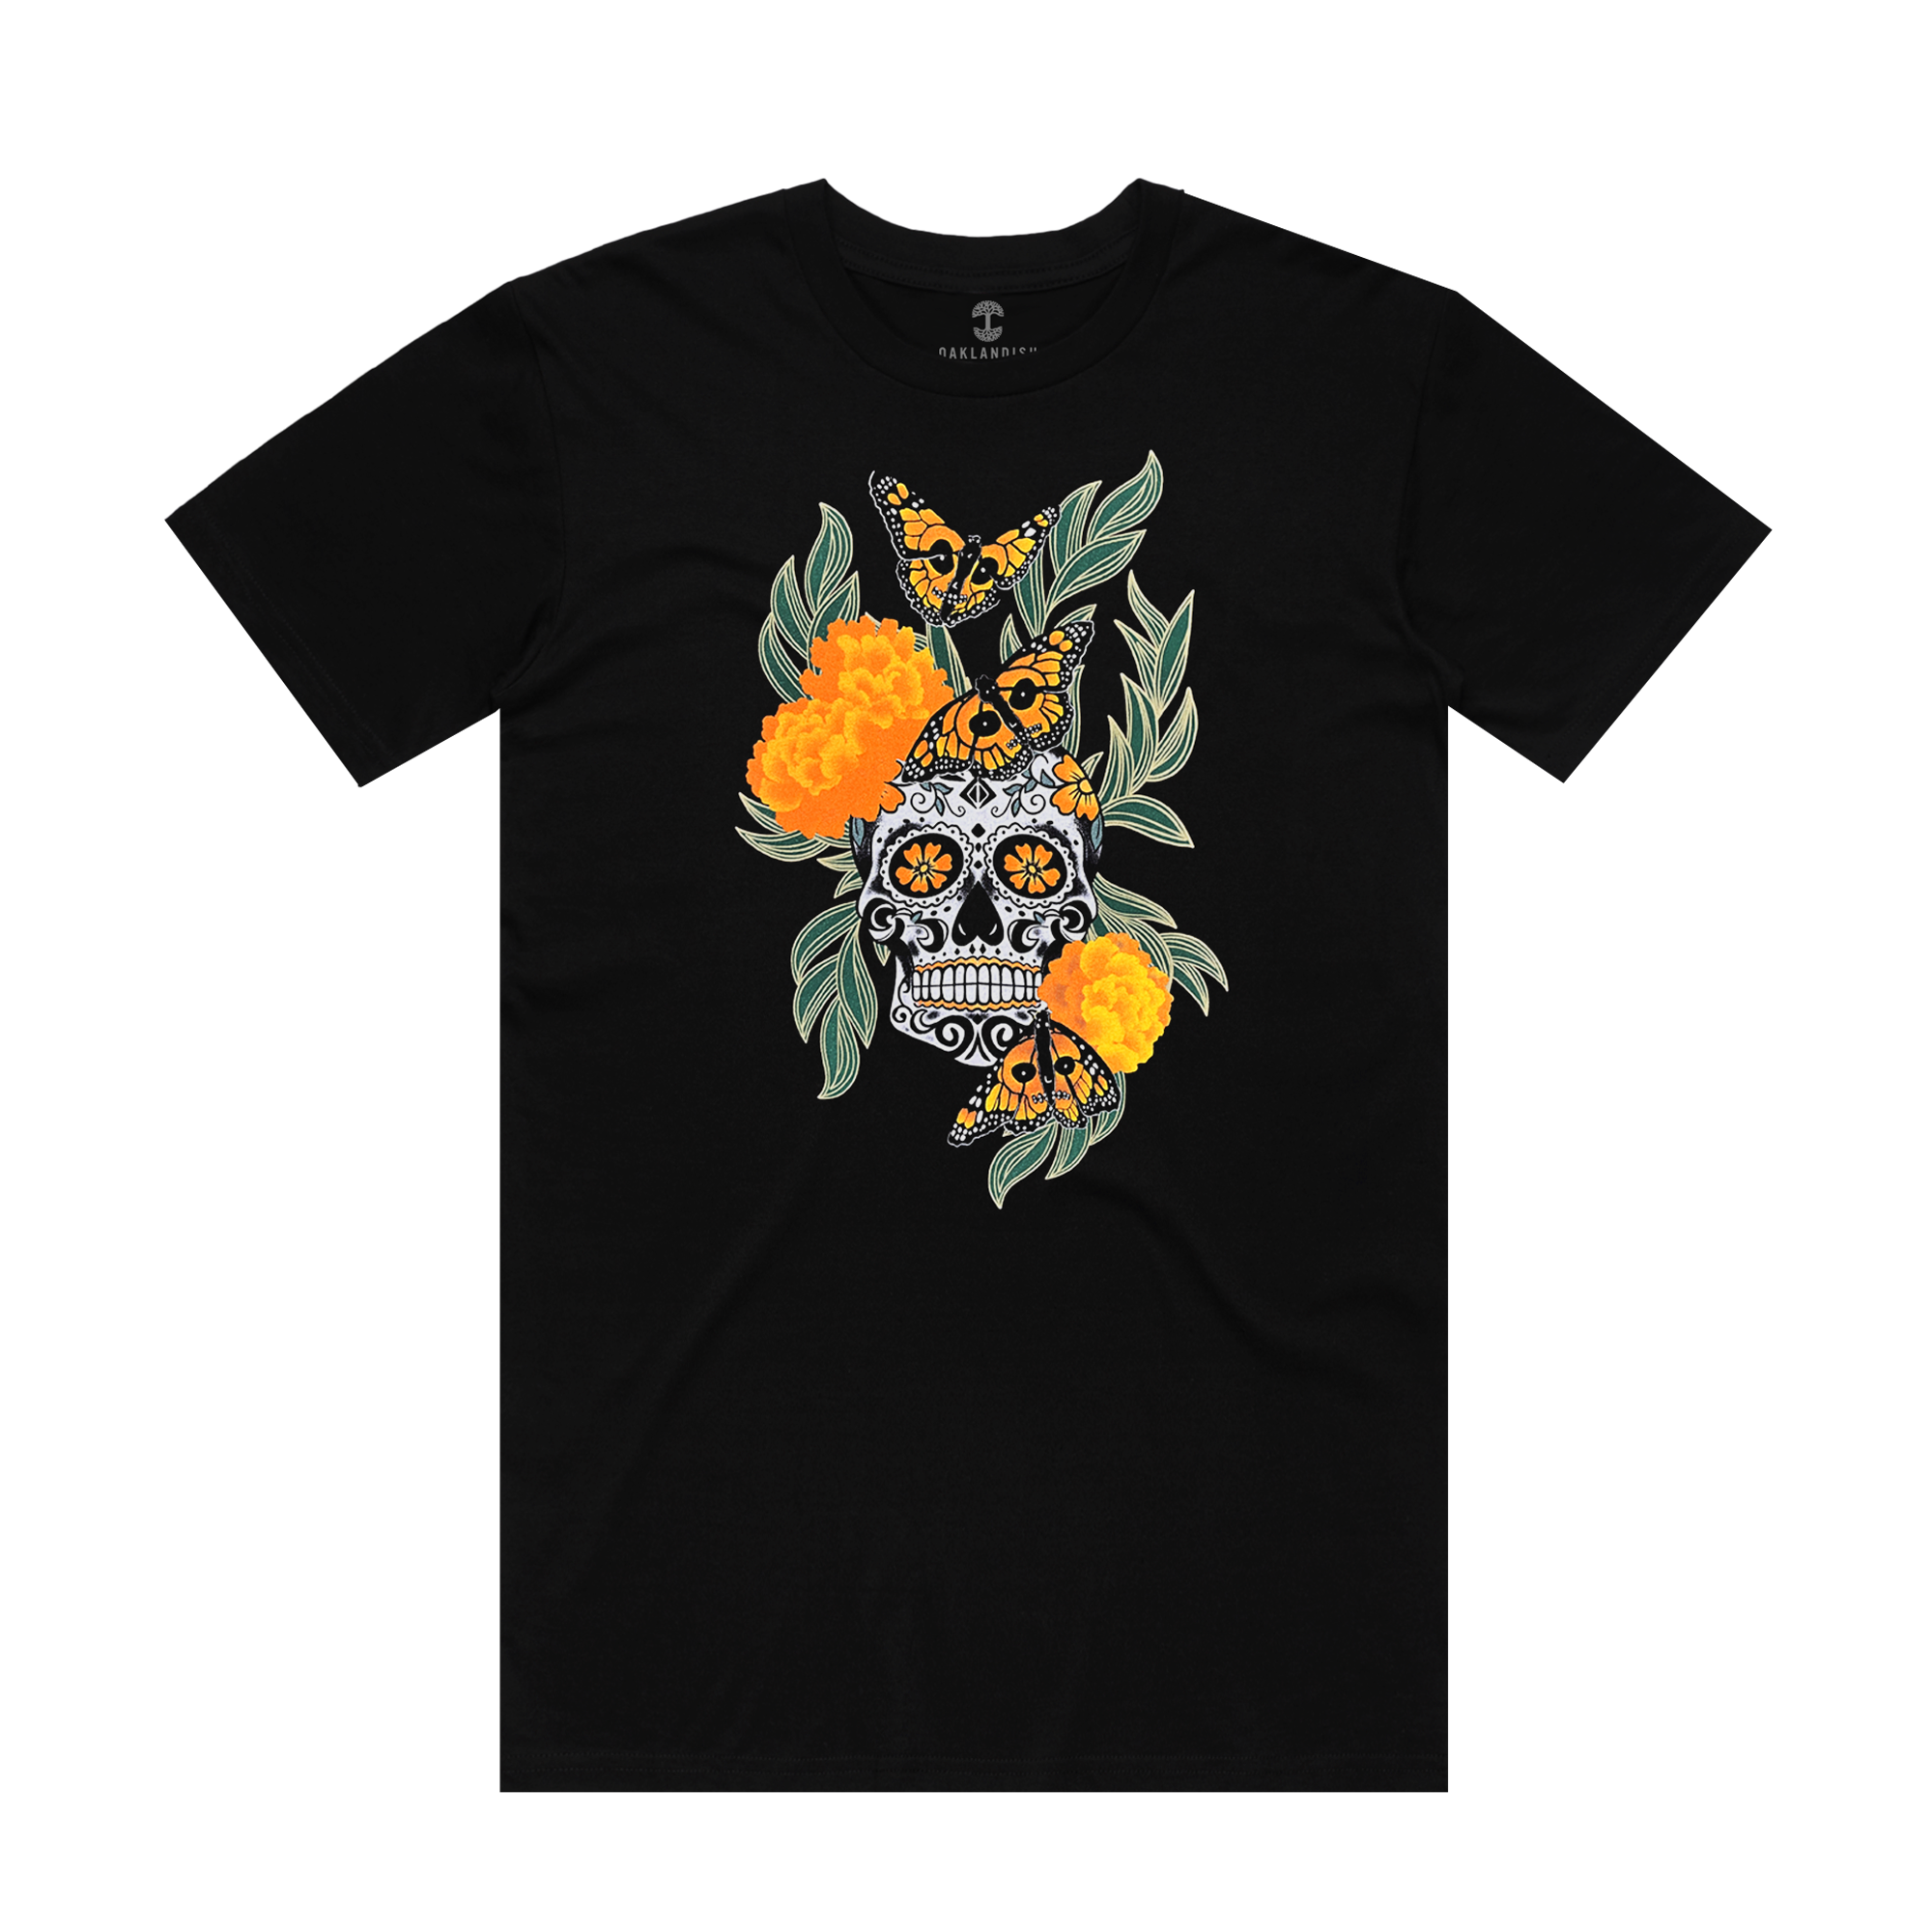 Black t-shirt with graphic art by Oakland artist Jet Martinez depicting a sugar skull surrounded by Marigolds and Monarch butterflies.